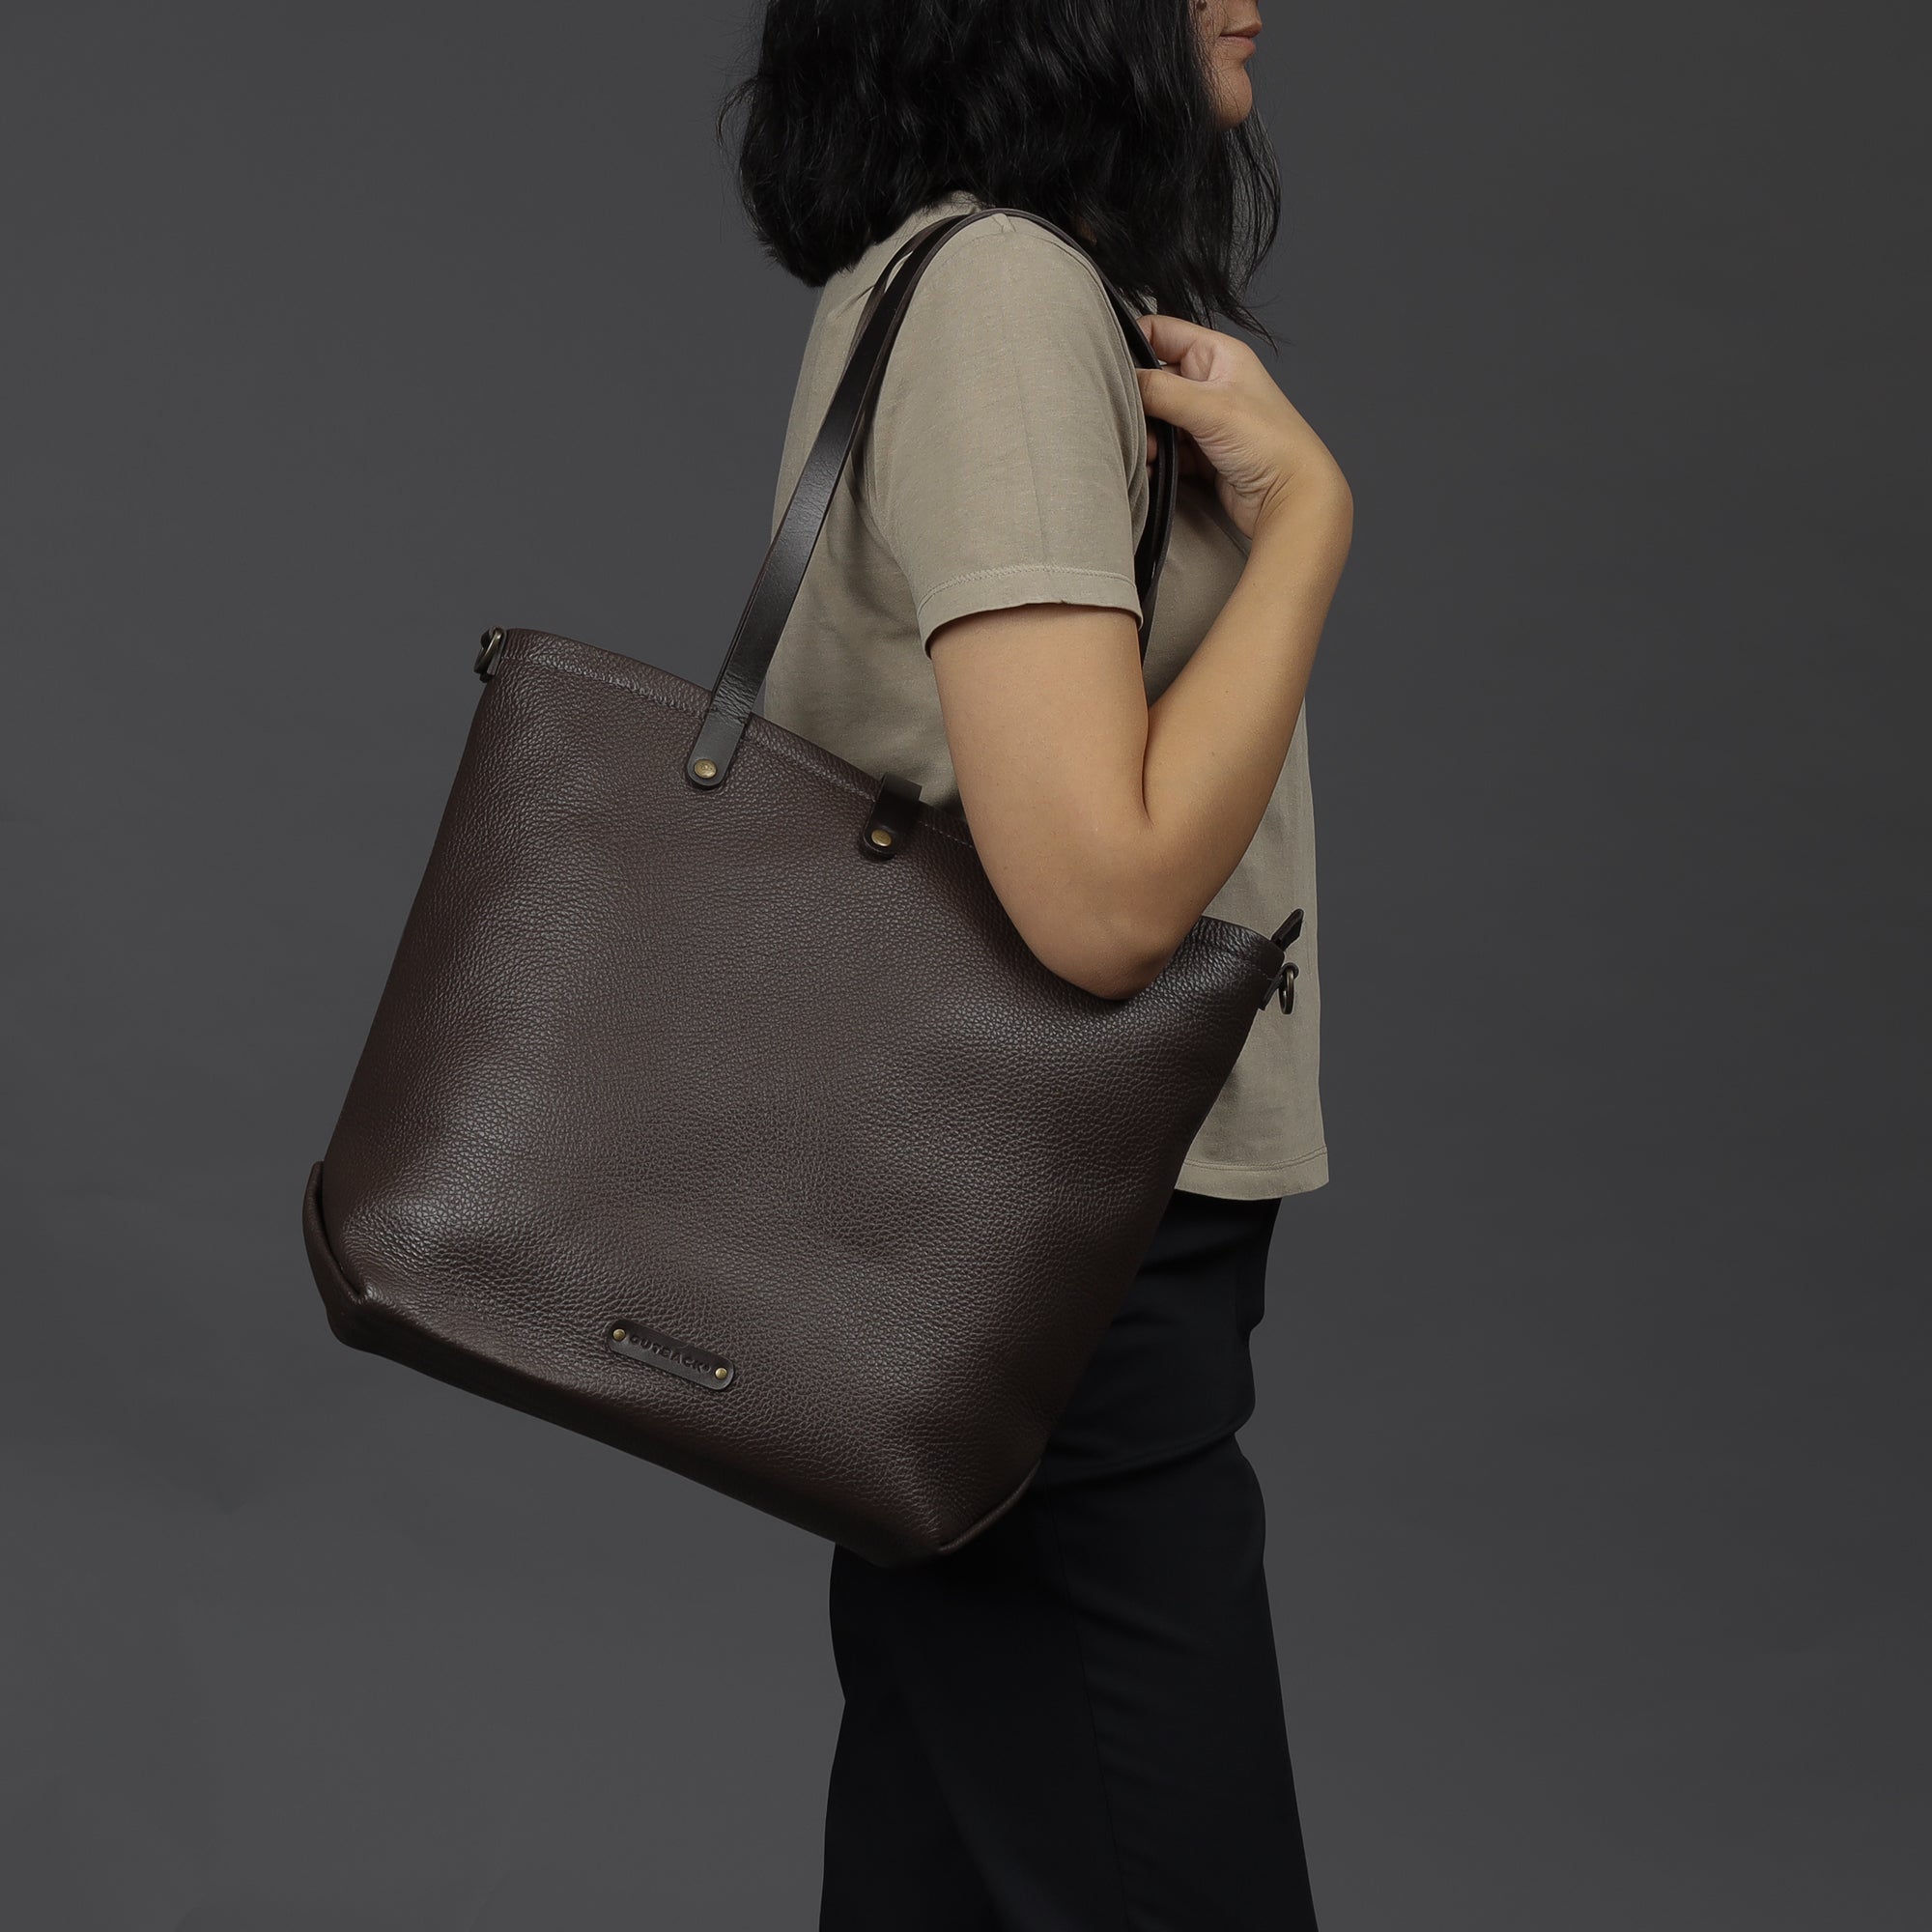 Leather canvas tote for shopping